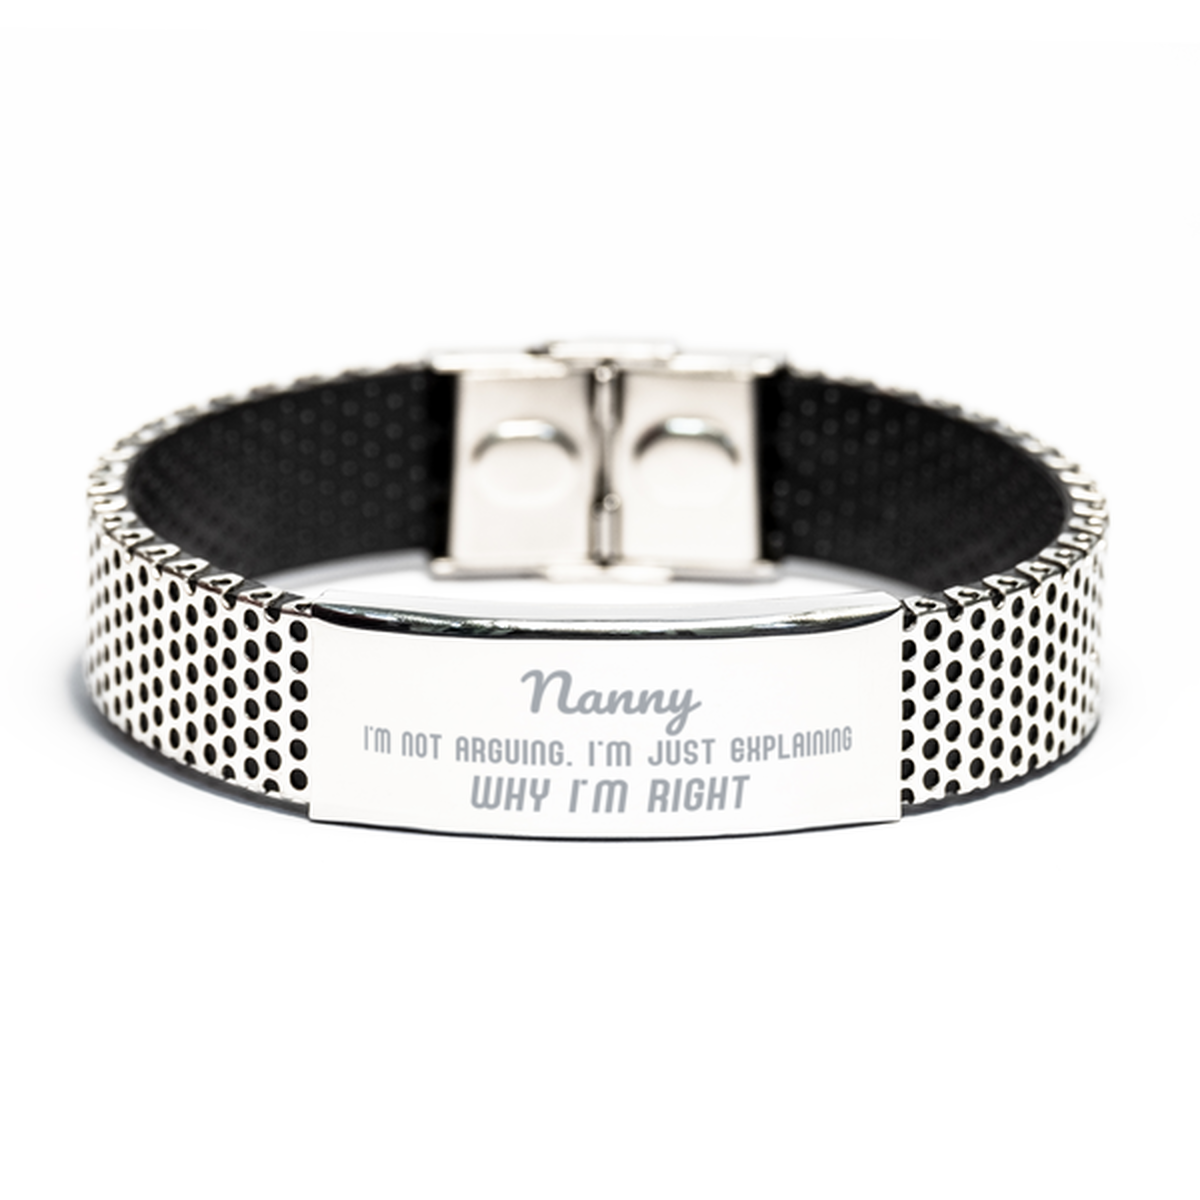 Nanny I'm not Arguing. I'm Just Explaining Why I'm RIGHT Stainless Steel Bracelet, Funny Saying Quote Nanny Gifts For Nanny Graduation Birthday Christmas Gifts for Men Women Coworker